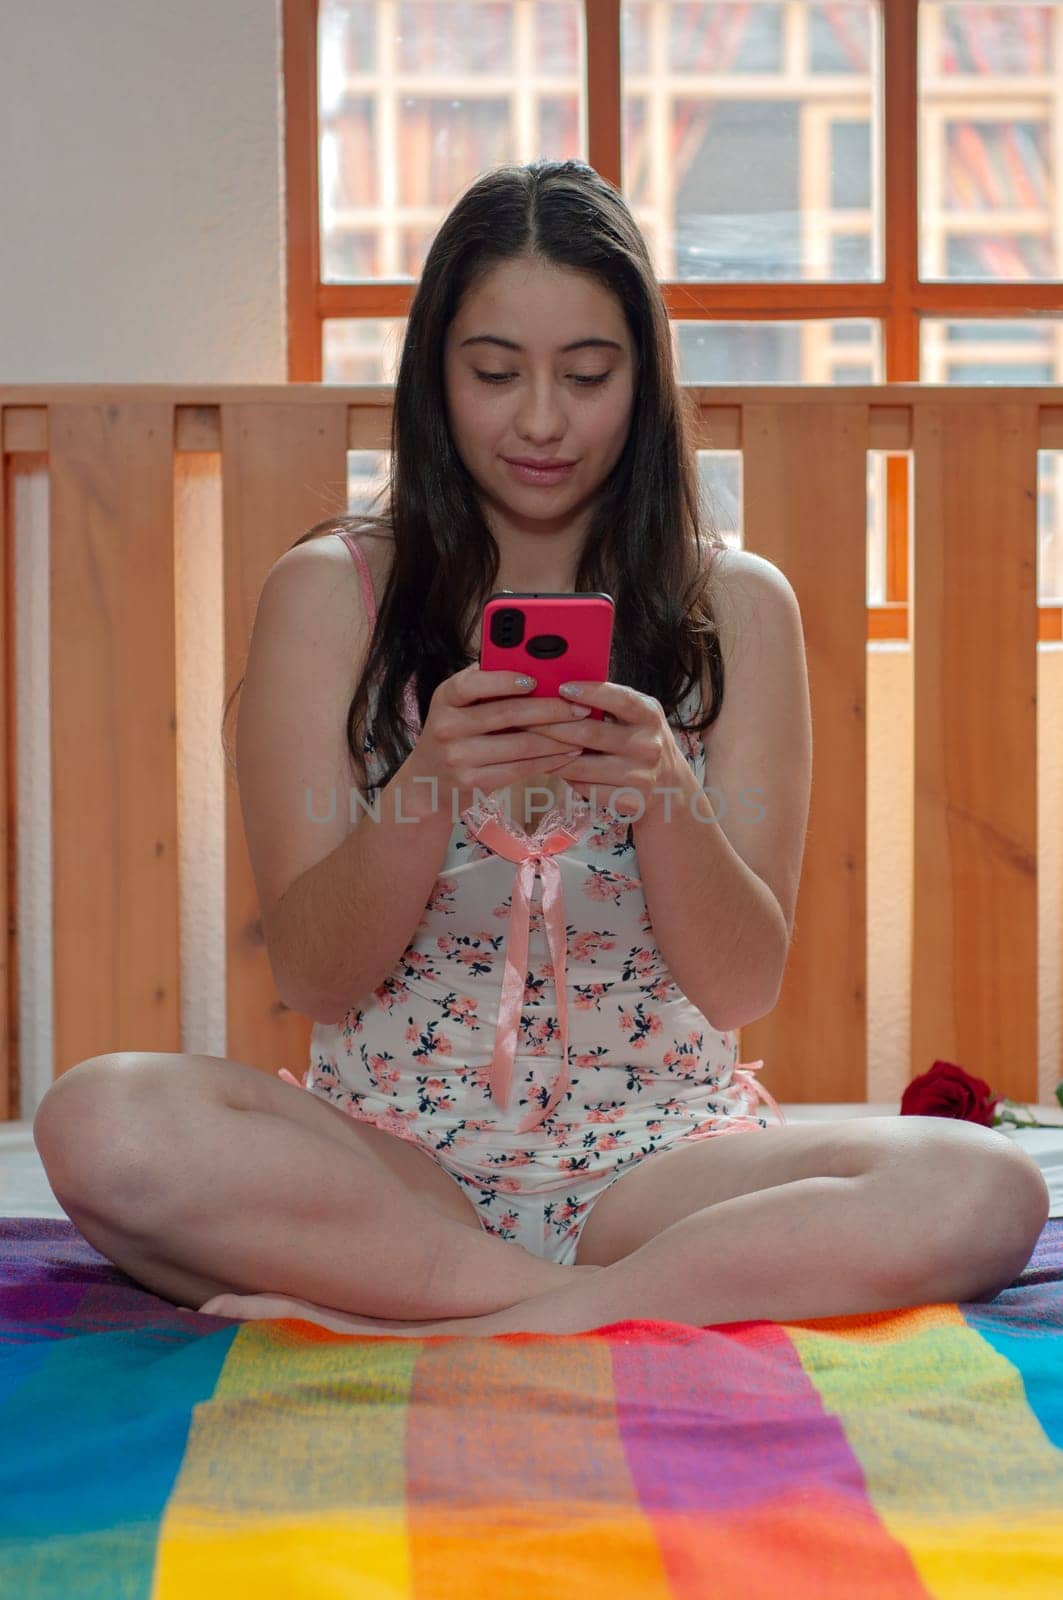 latin american woman writing a message with her cell phone while sitting on her bed in her nightclothes. High quality photo